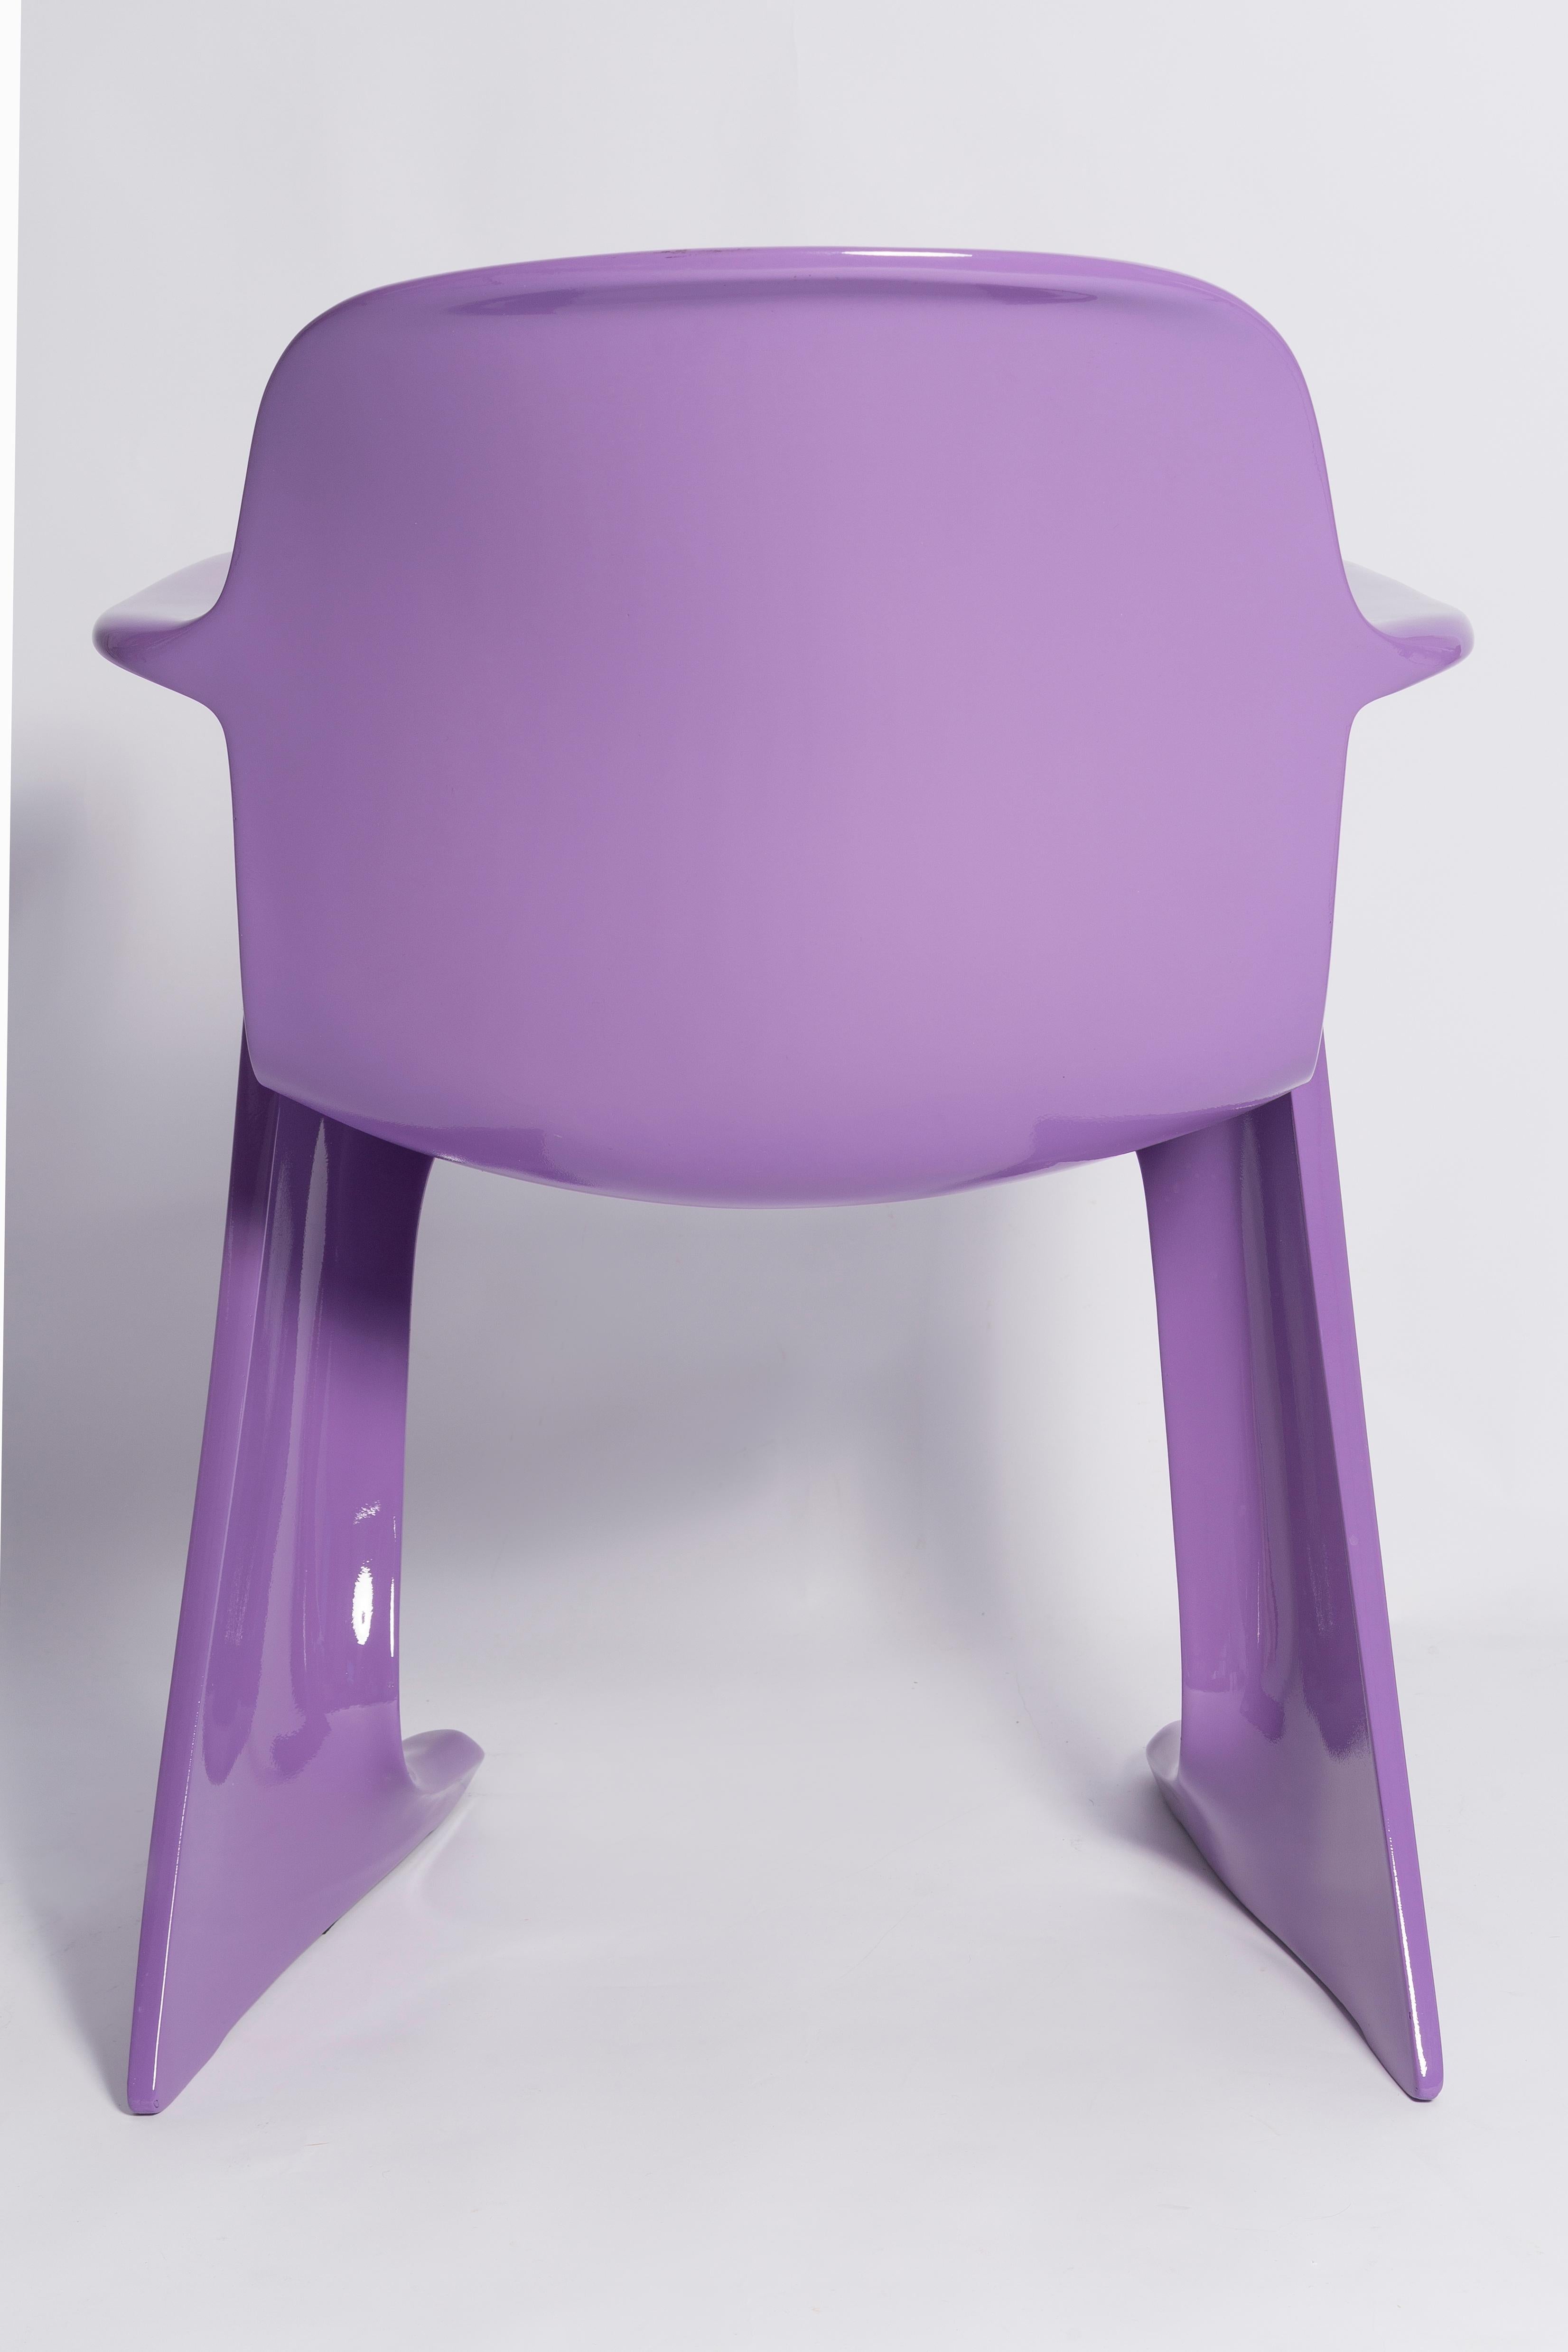 Blue Lilac Kangaroo Chair Designed by Ernst Moeckl, Germany, 1968 For Sale 5